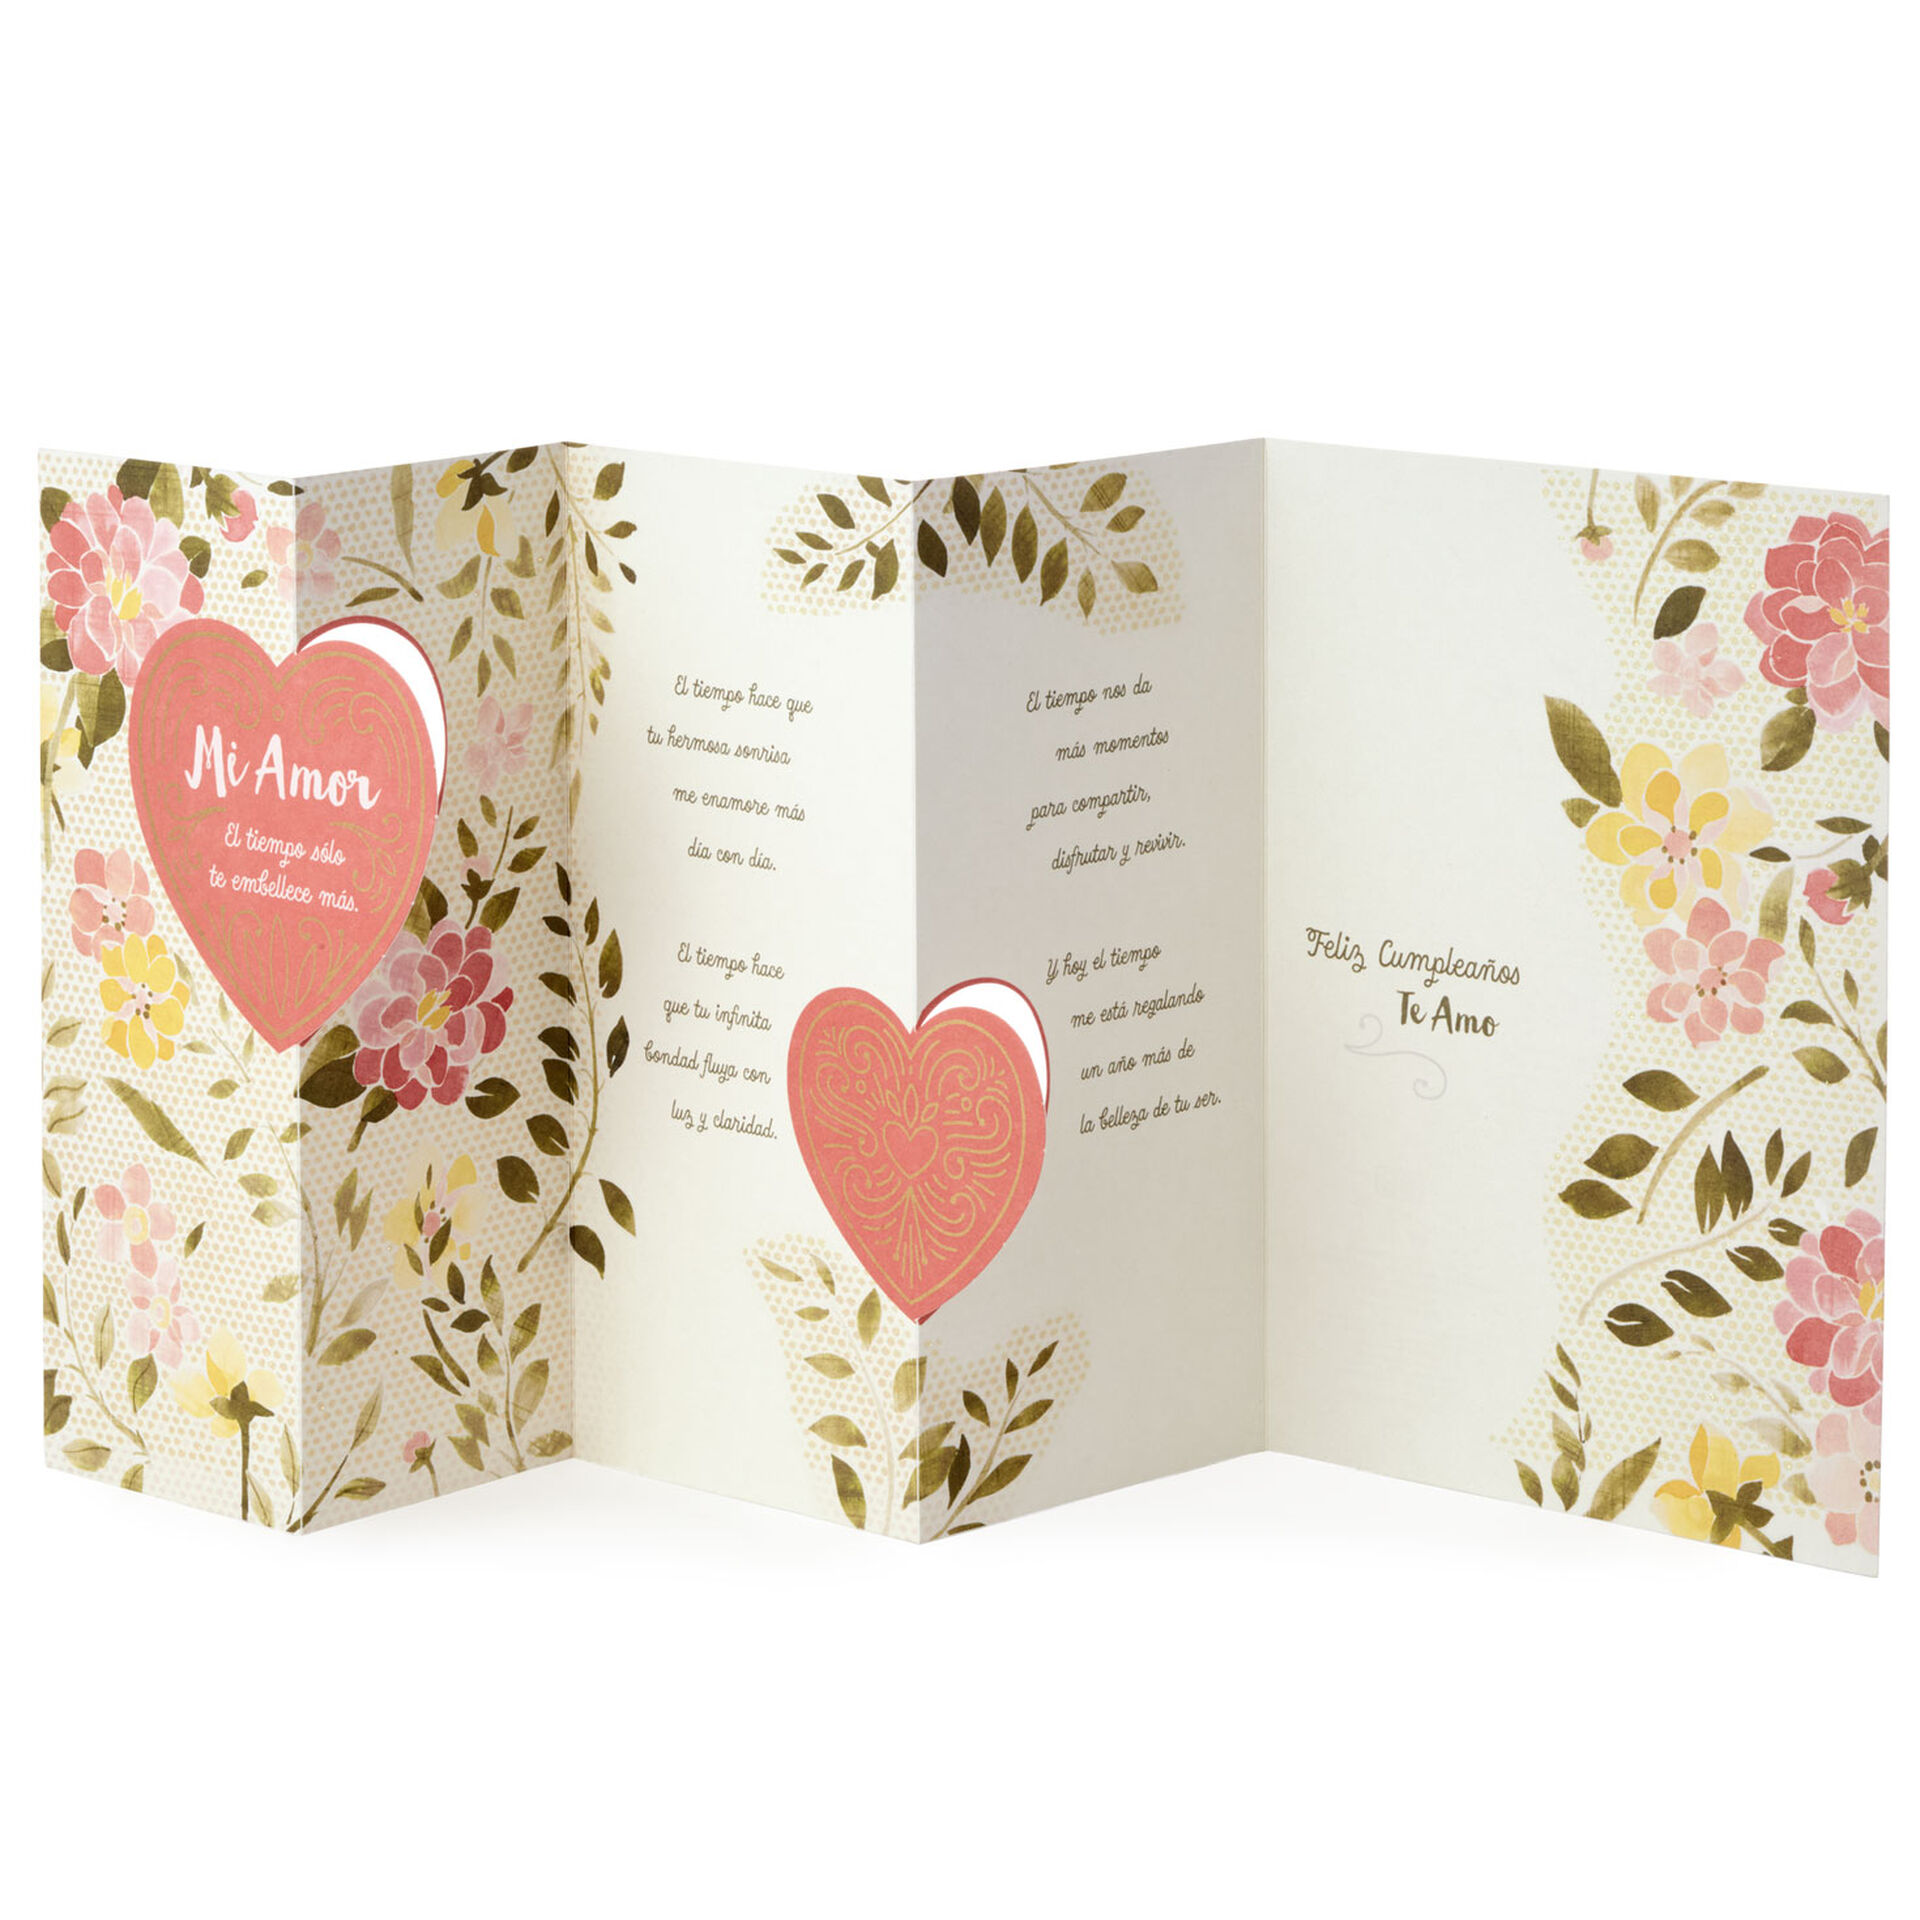 Flowers-and-Hearts-Spanish-Birthday-Card-for-Wife_459BIF1327_02